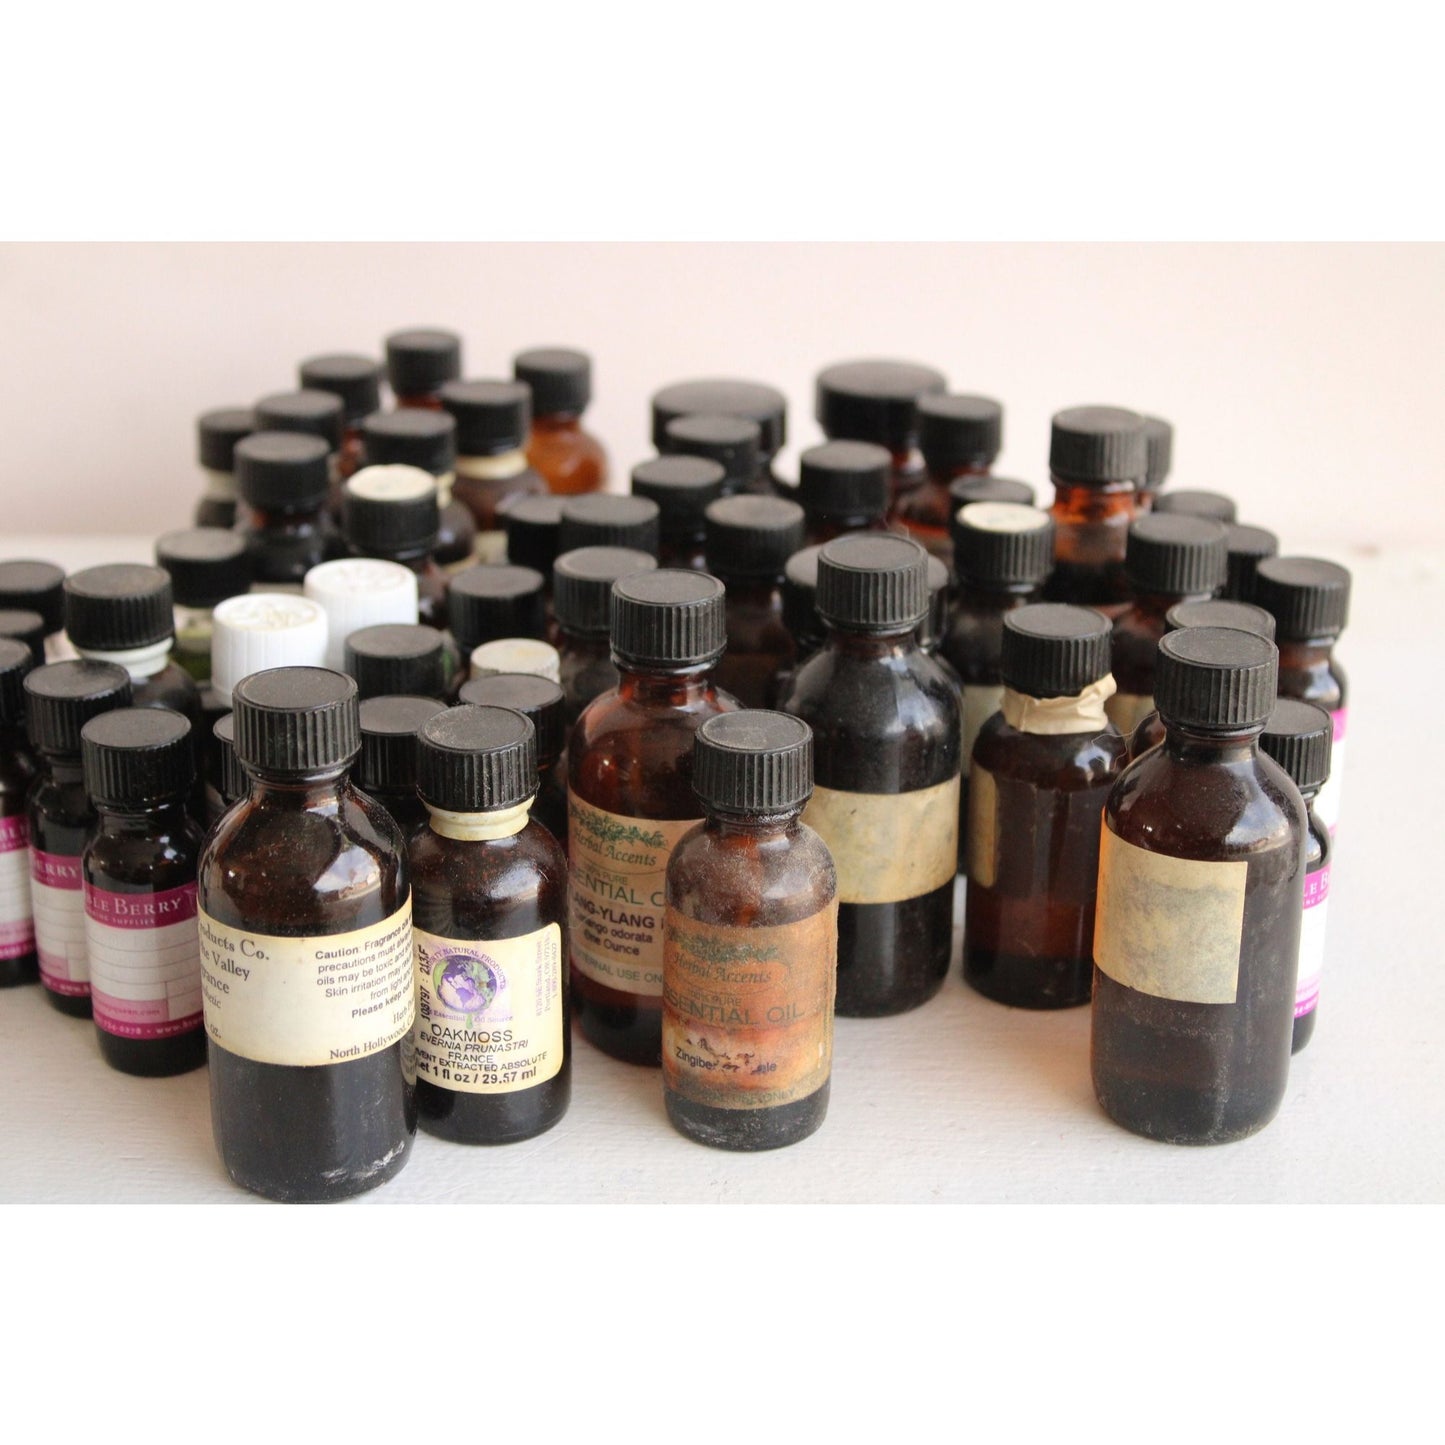 Essential and Fragrance Oils Lot, Approx. 60 Bottles, Mixed Scents, Mixed Brands